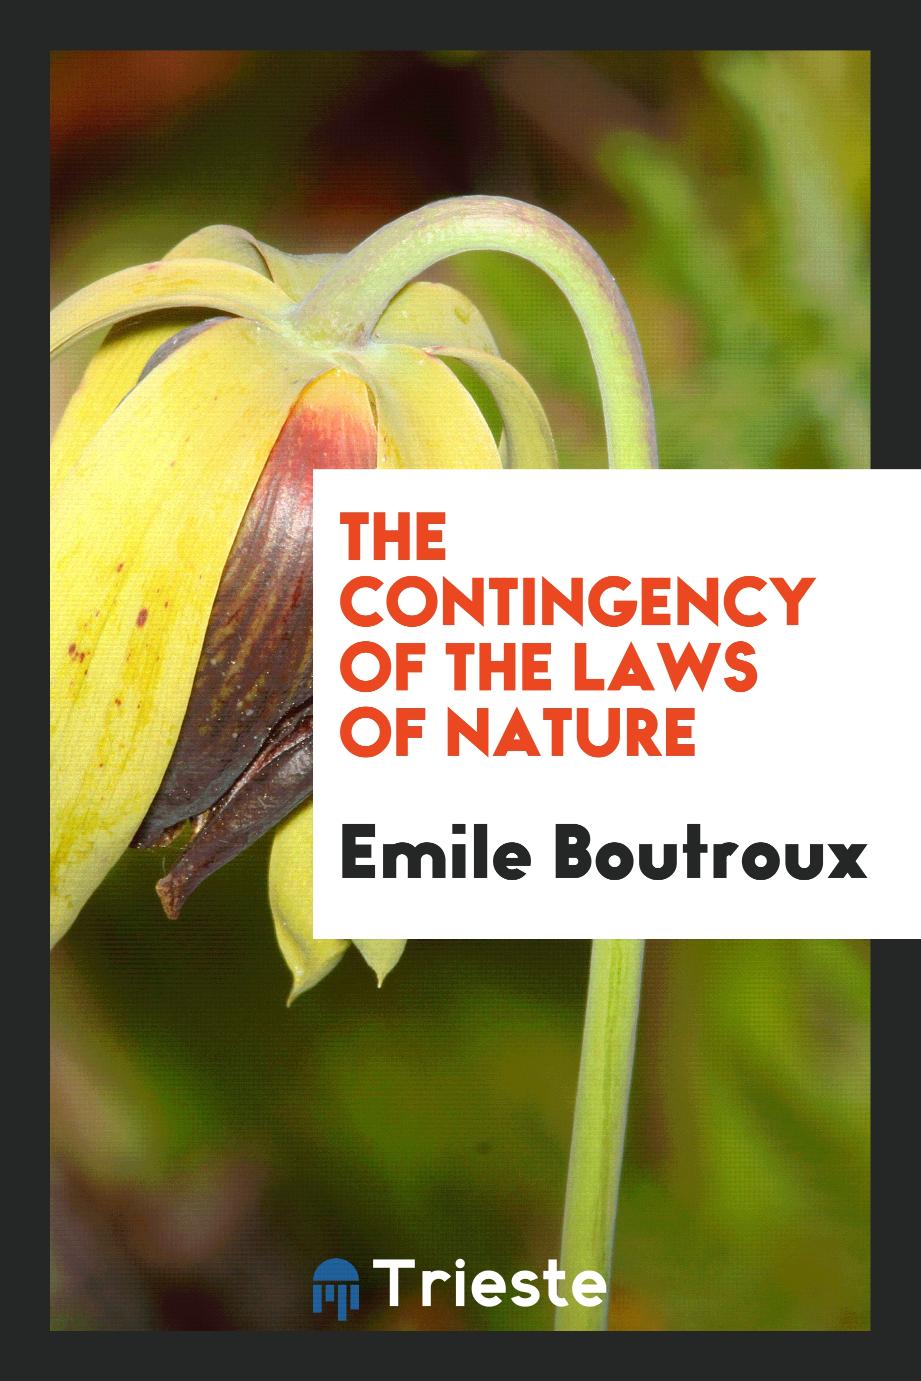 The contingency of the laws of nature